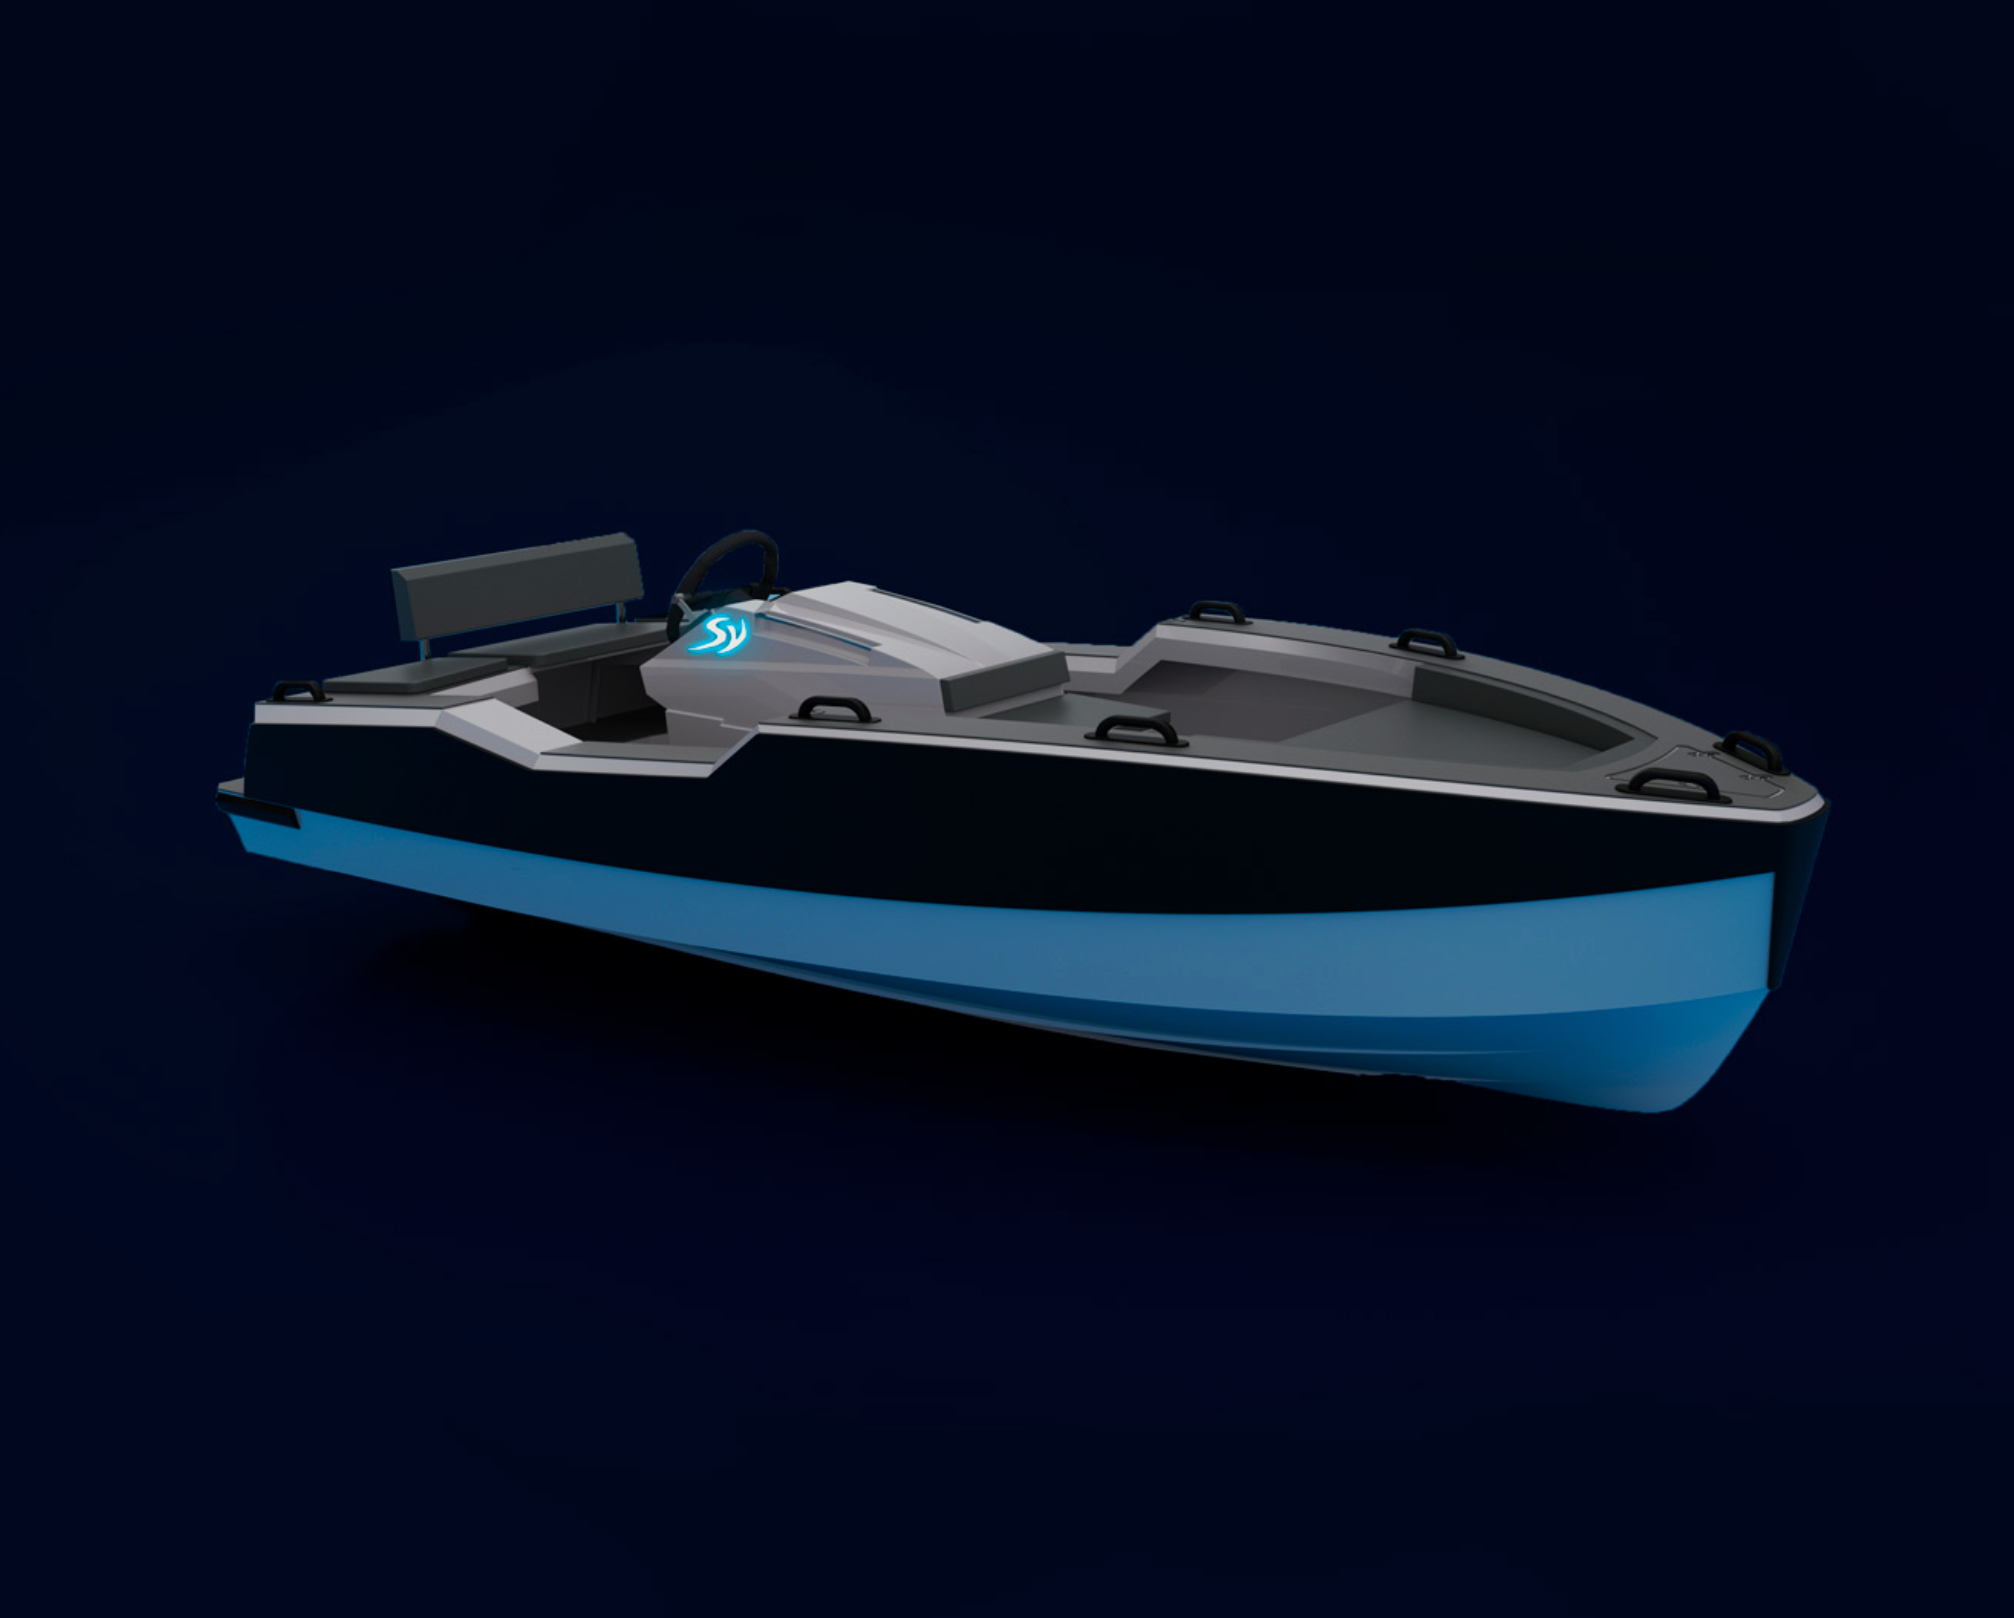 Marking the beginning of a range of fully electric tenders, the SILENT Tender 400 perfectly complements Silent Yachts' solar powered catamaran boats.